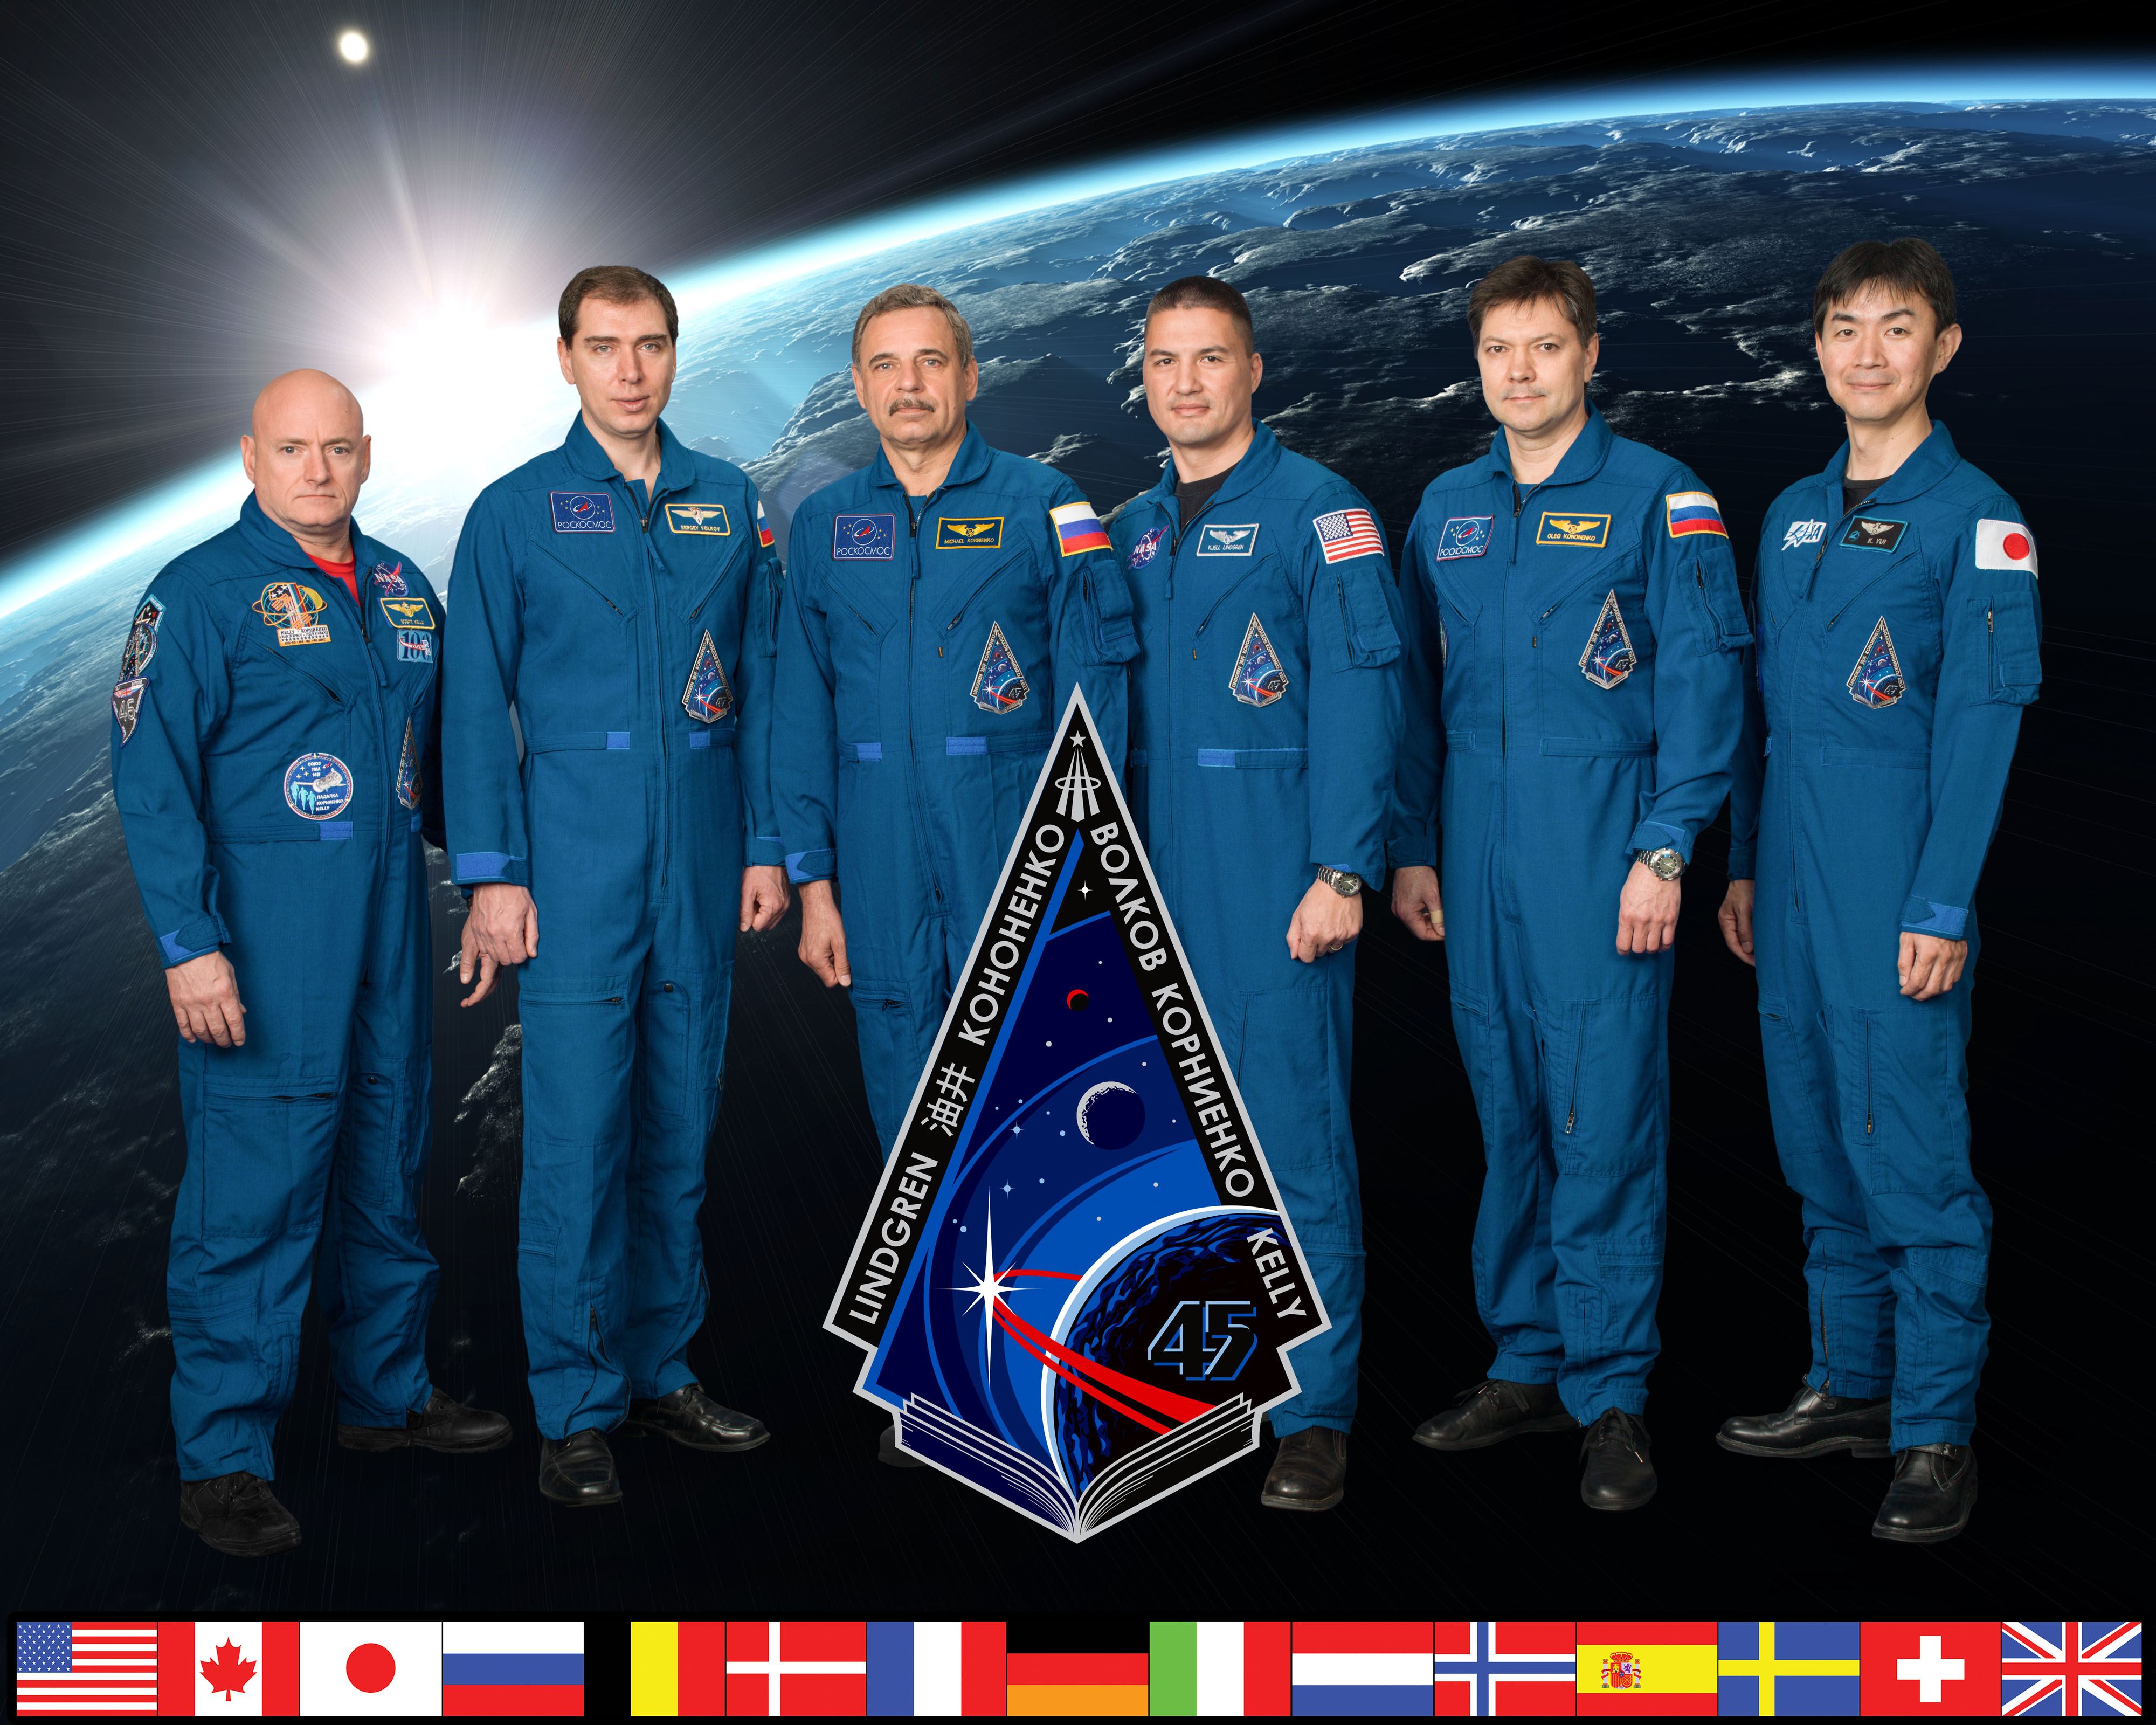 Expedition 45 Official Crew Portrait